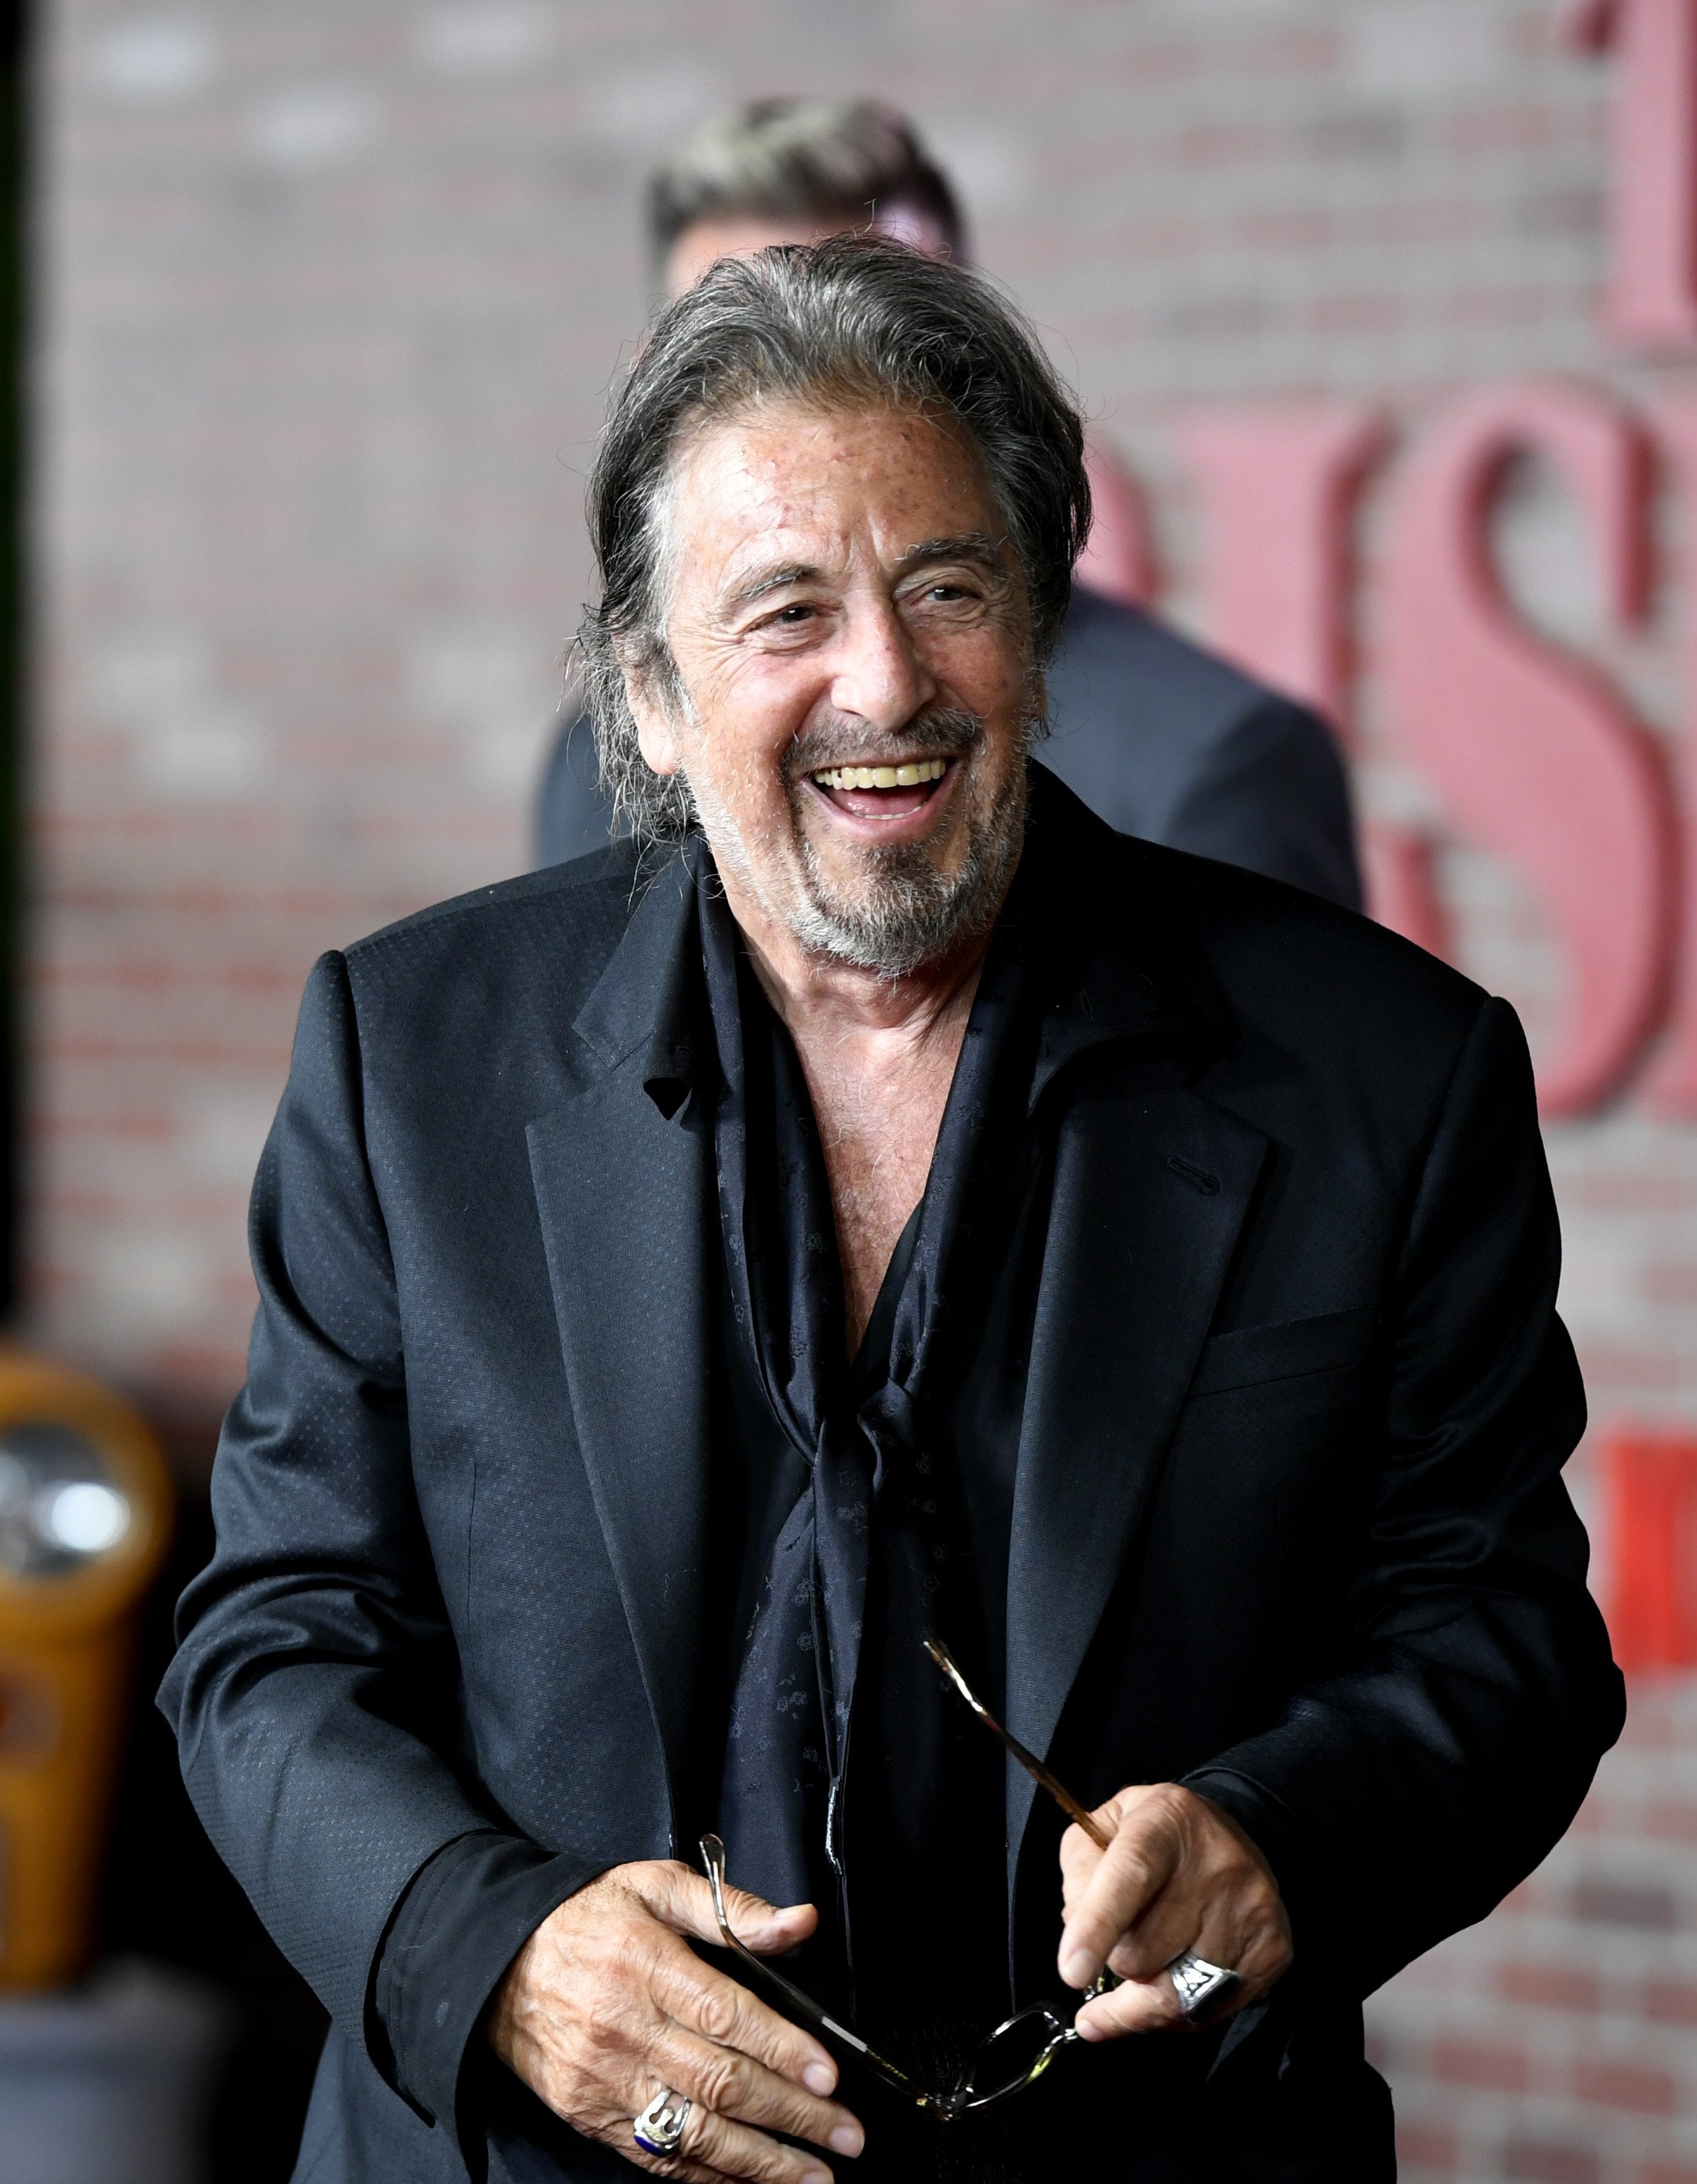 Al Pacino attends the Premiere Of Netflix's "The Irishman" at TCL Chinese Theatre on October 24, 2019, in Hollywood, California. | Source: Getty Images.